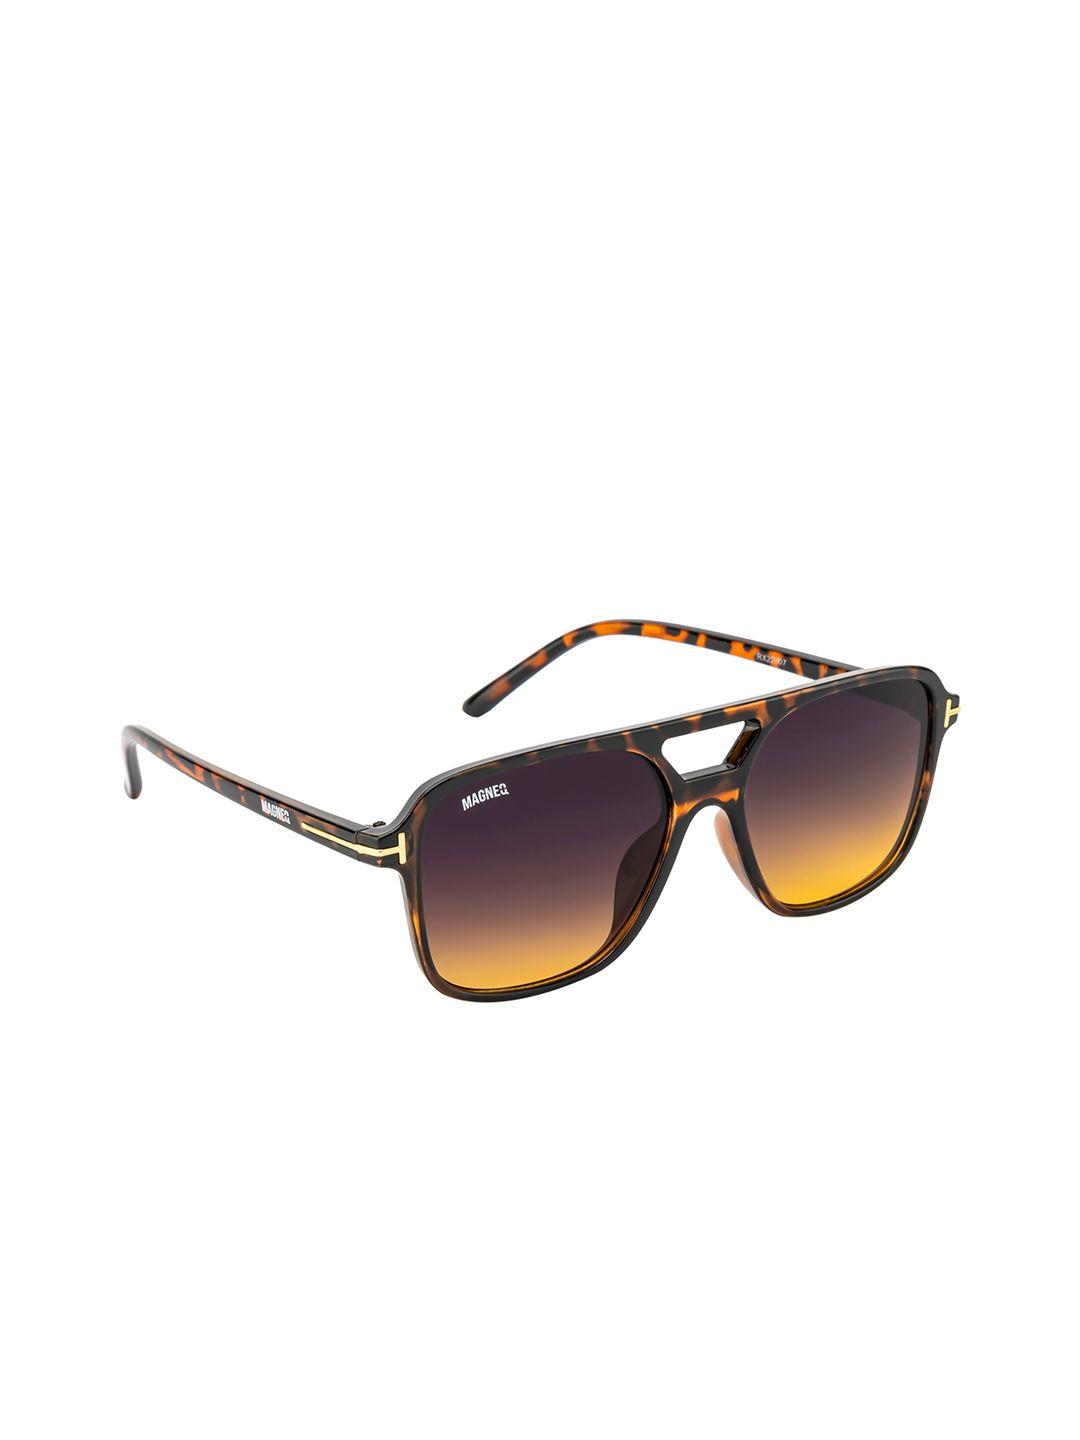 magneq lens & aviator sunglasses with polarised & uv protected lens mg 2207/s c1 5518